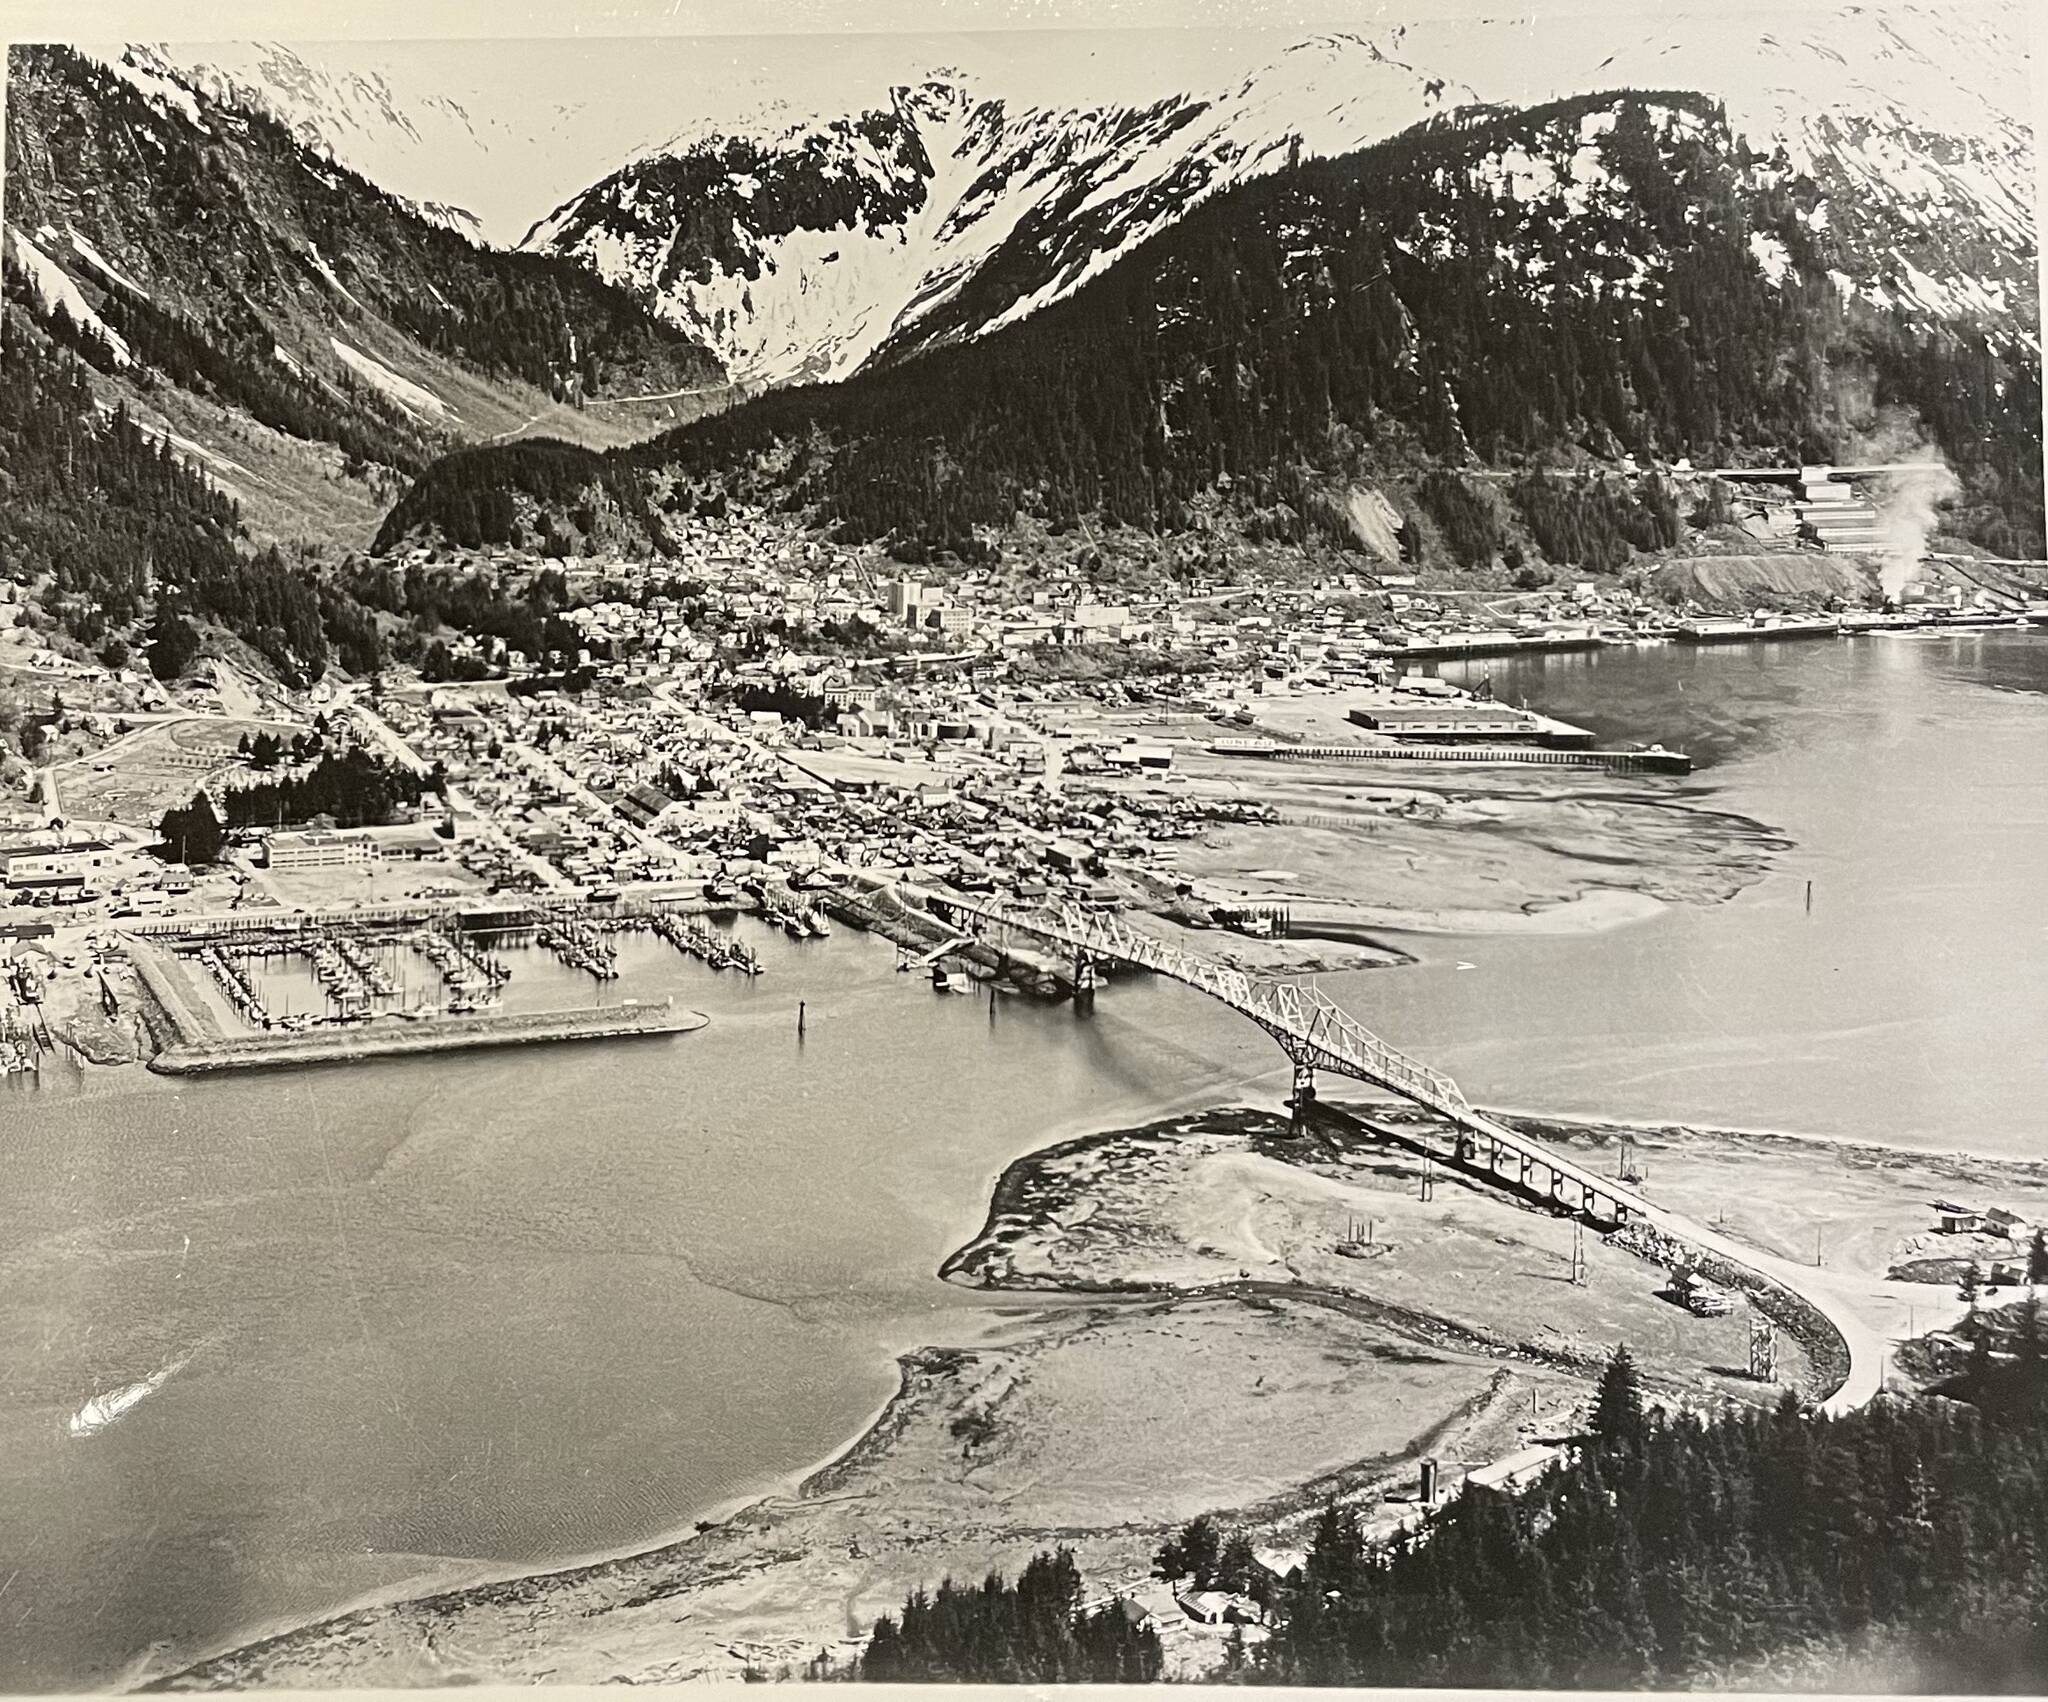 The Douglas Bridge and a view of Juneau looking up Last Chance Basin, undated, pre-1962. (Alaska State Library PC51-73)